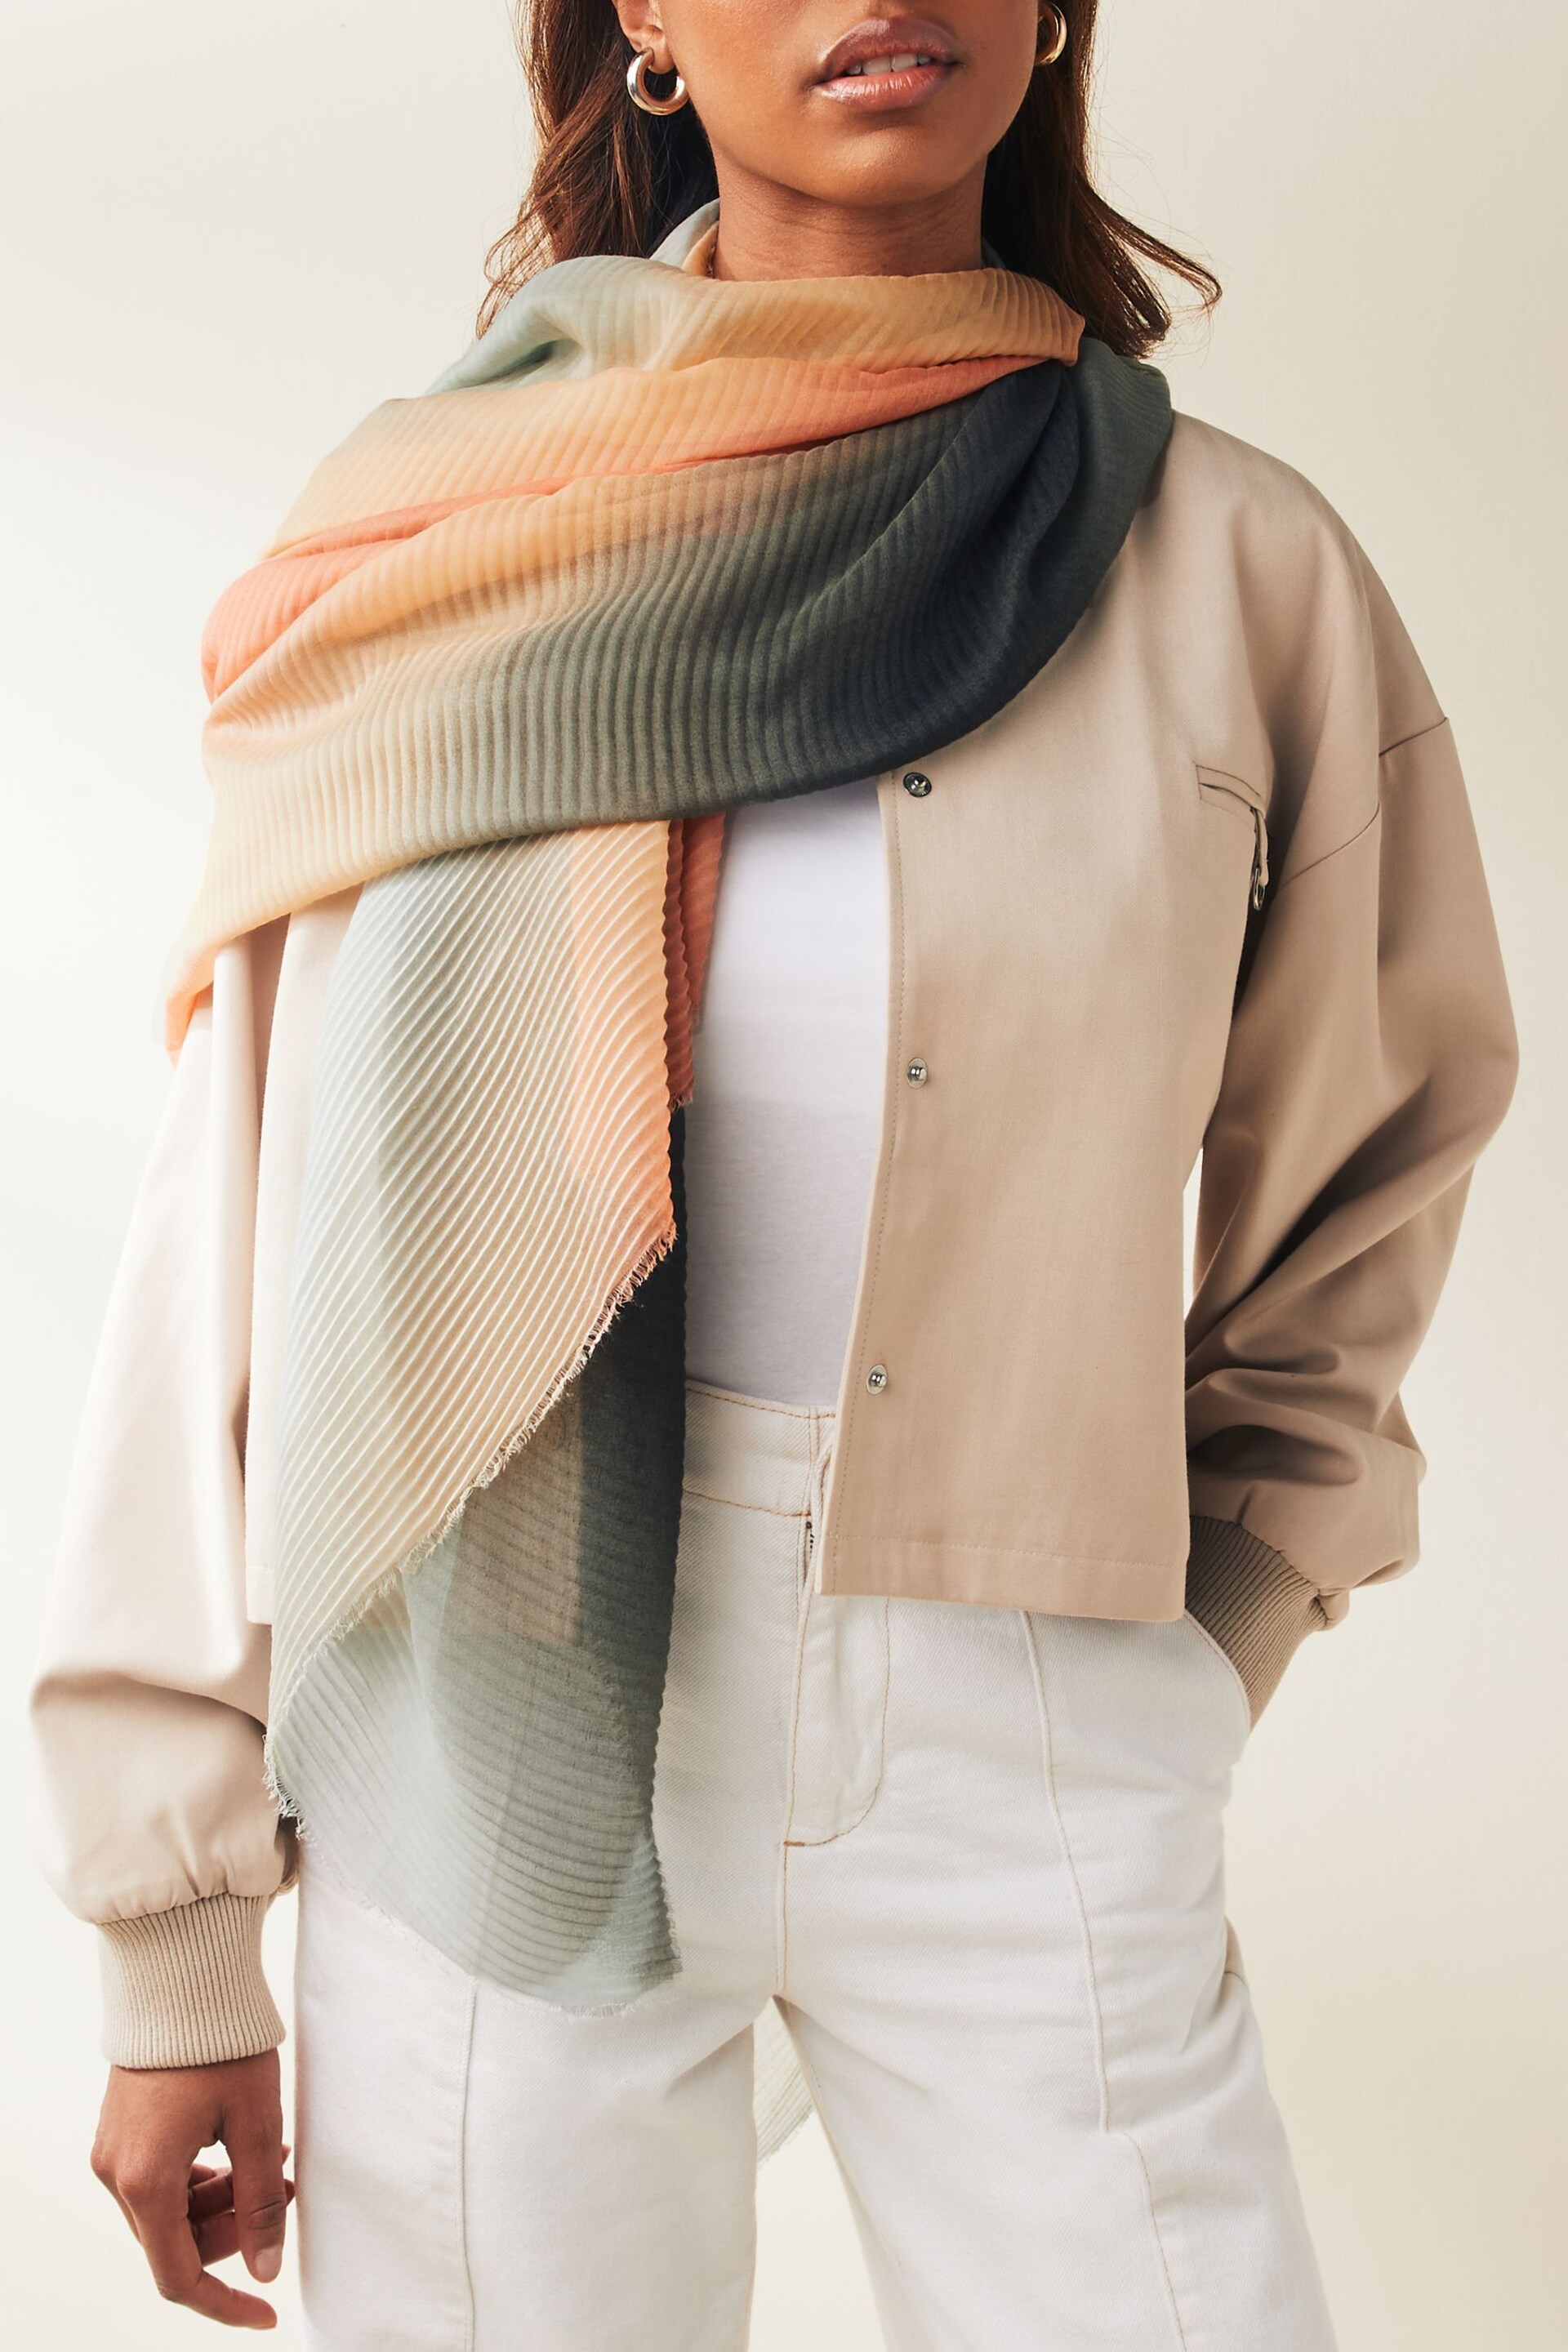 Nude Ombre Plisse Lightweight Scarf - Image 1 of 5